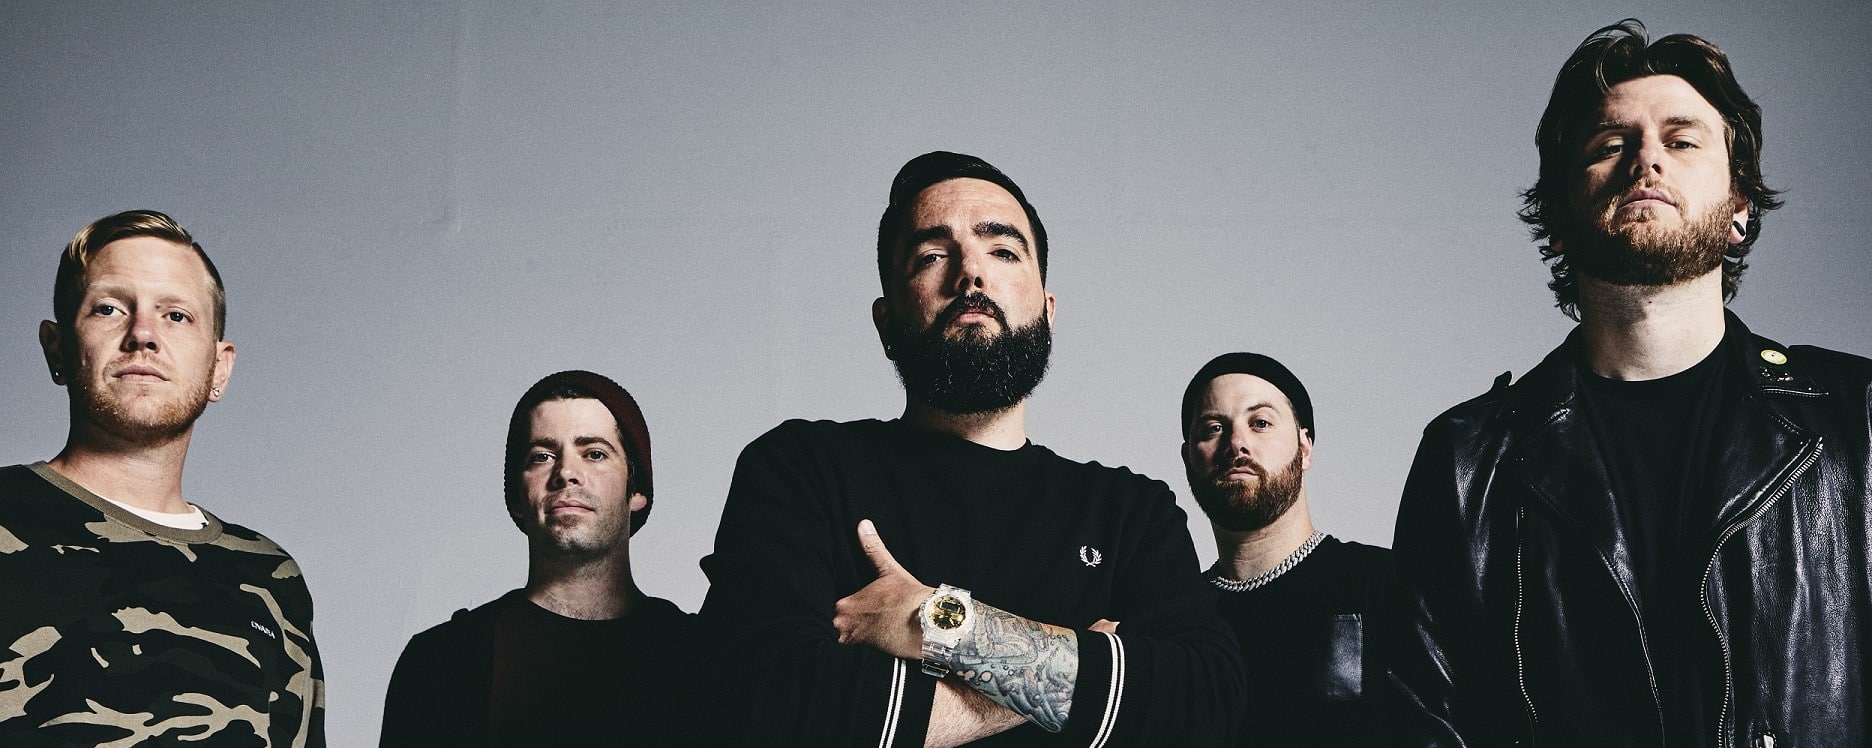 A Day To Remember Releases Forthcoming Album Closer “Everything We Need”